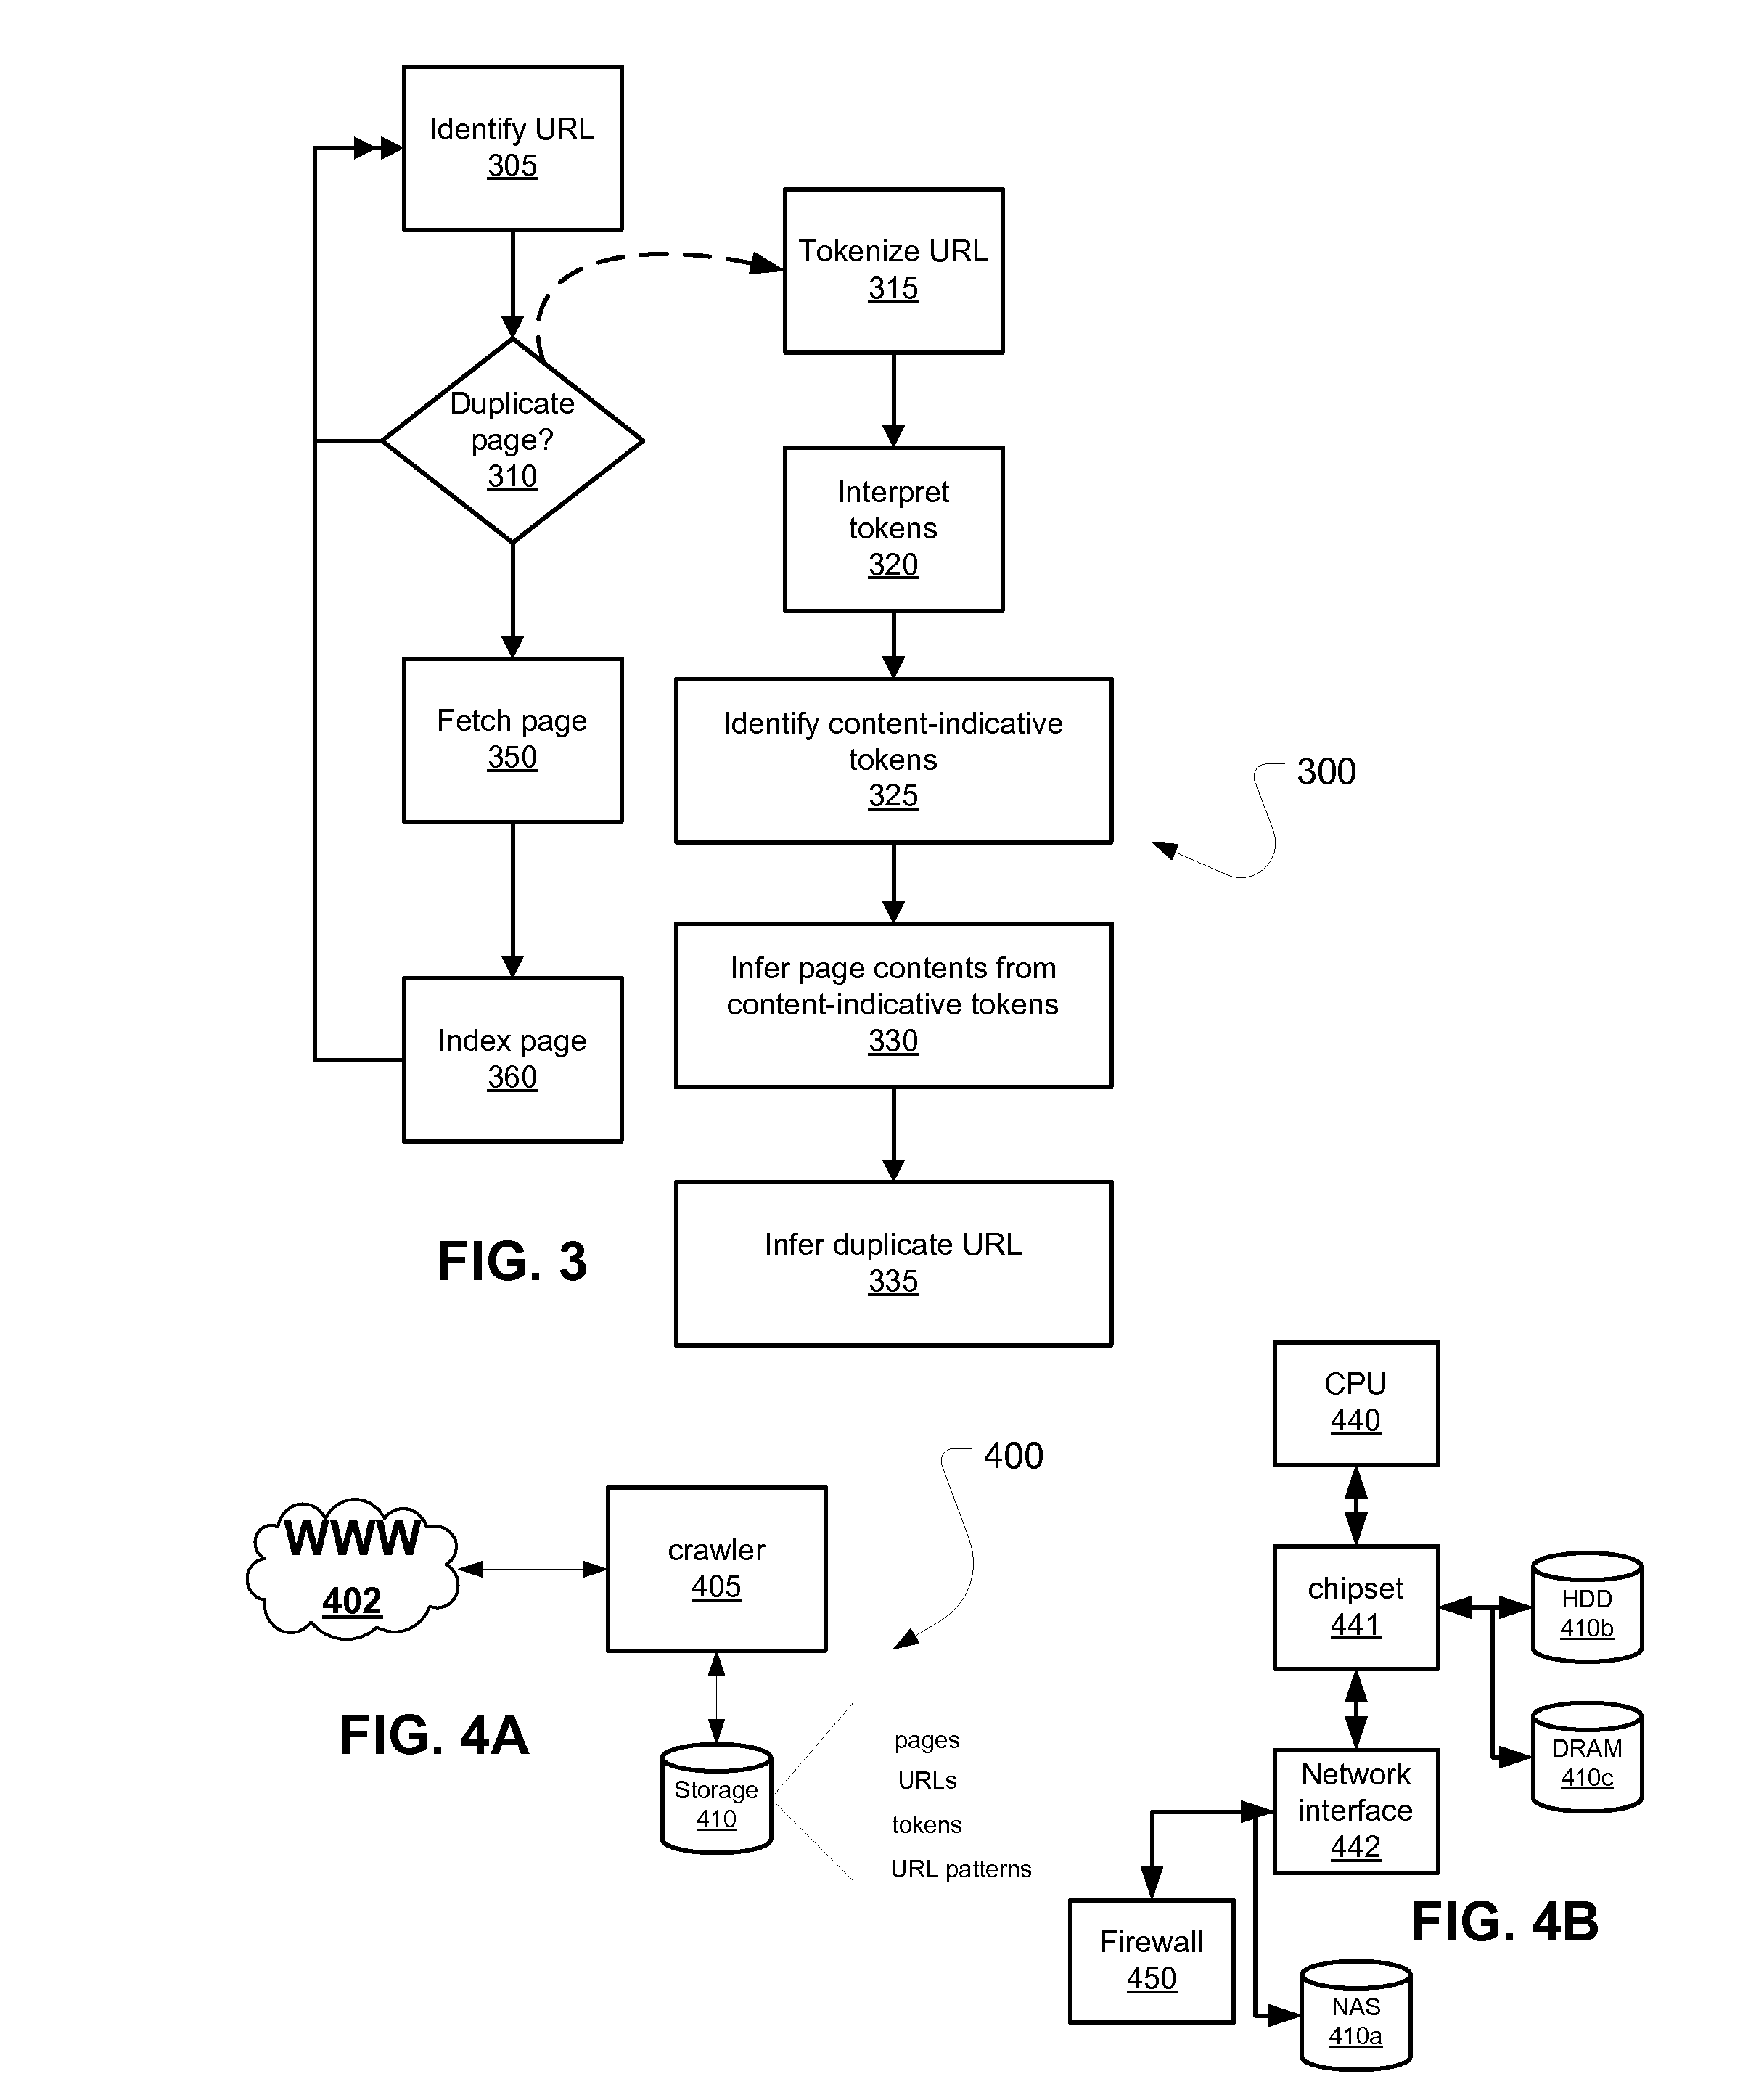 Systems and methods for tokenizing and interpreting uniform resource locators